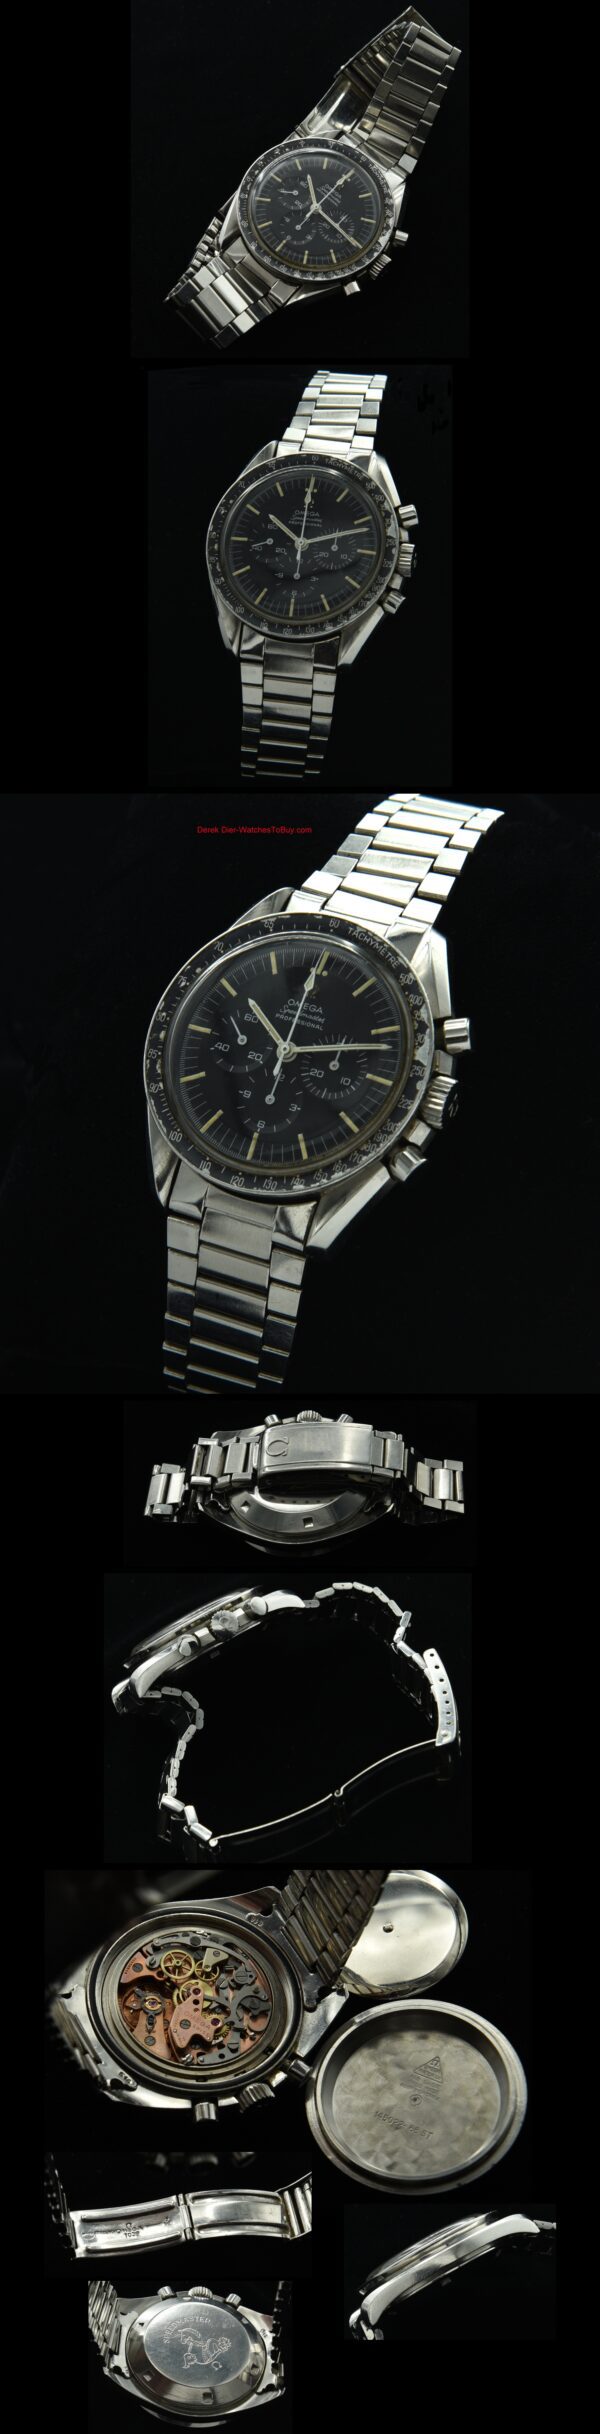 1968 Omega Speedmaster stainless steel chronograph watch with original logo dial, bezel, lyre lugs, hands, lume, and caliber 861 movement.